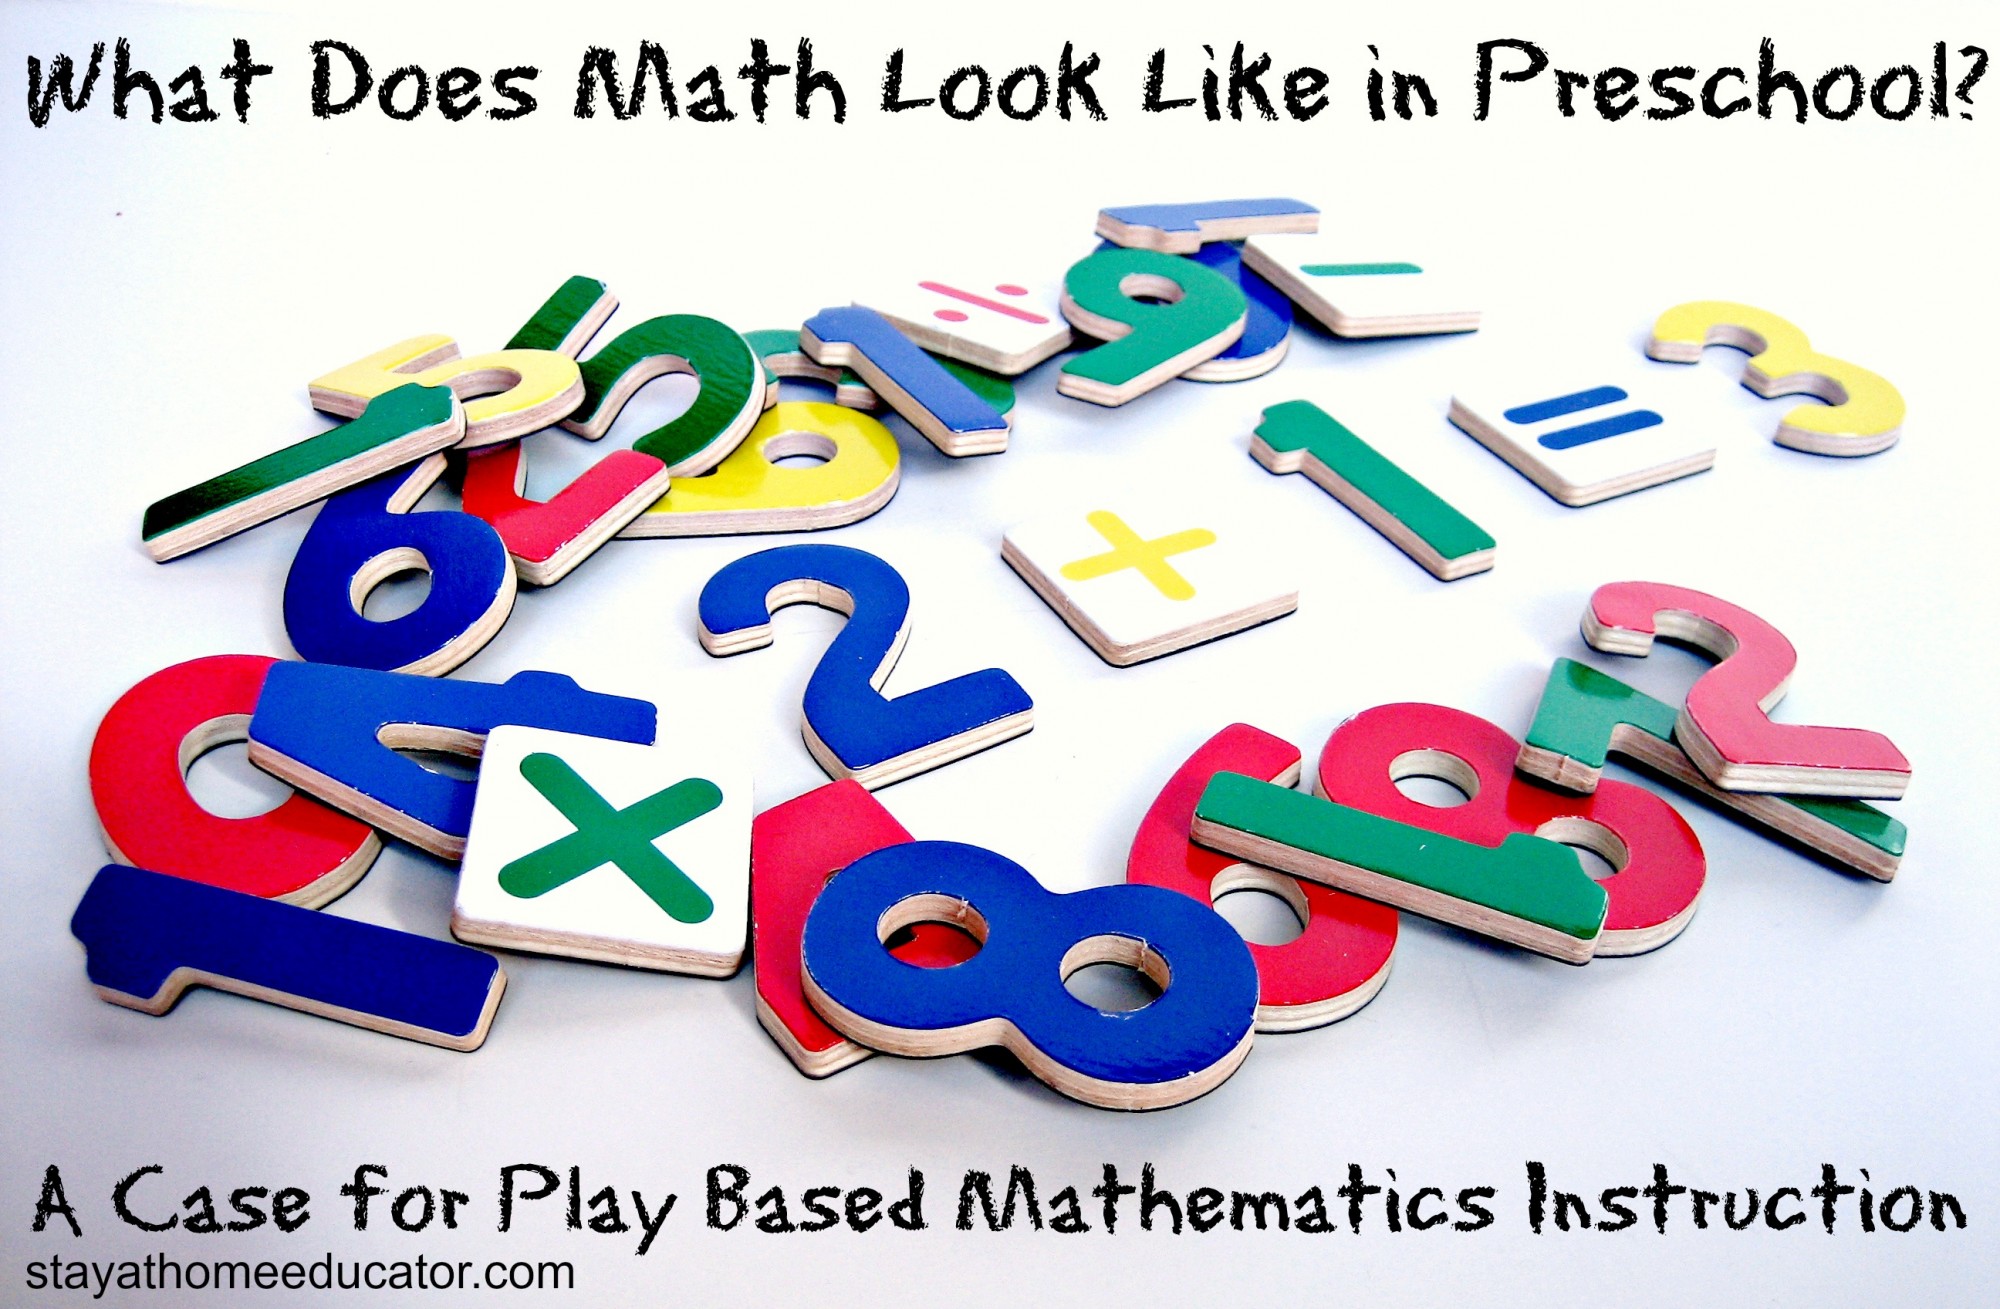 What Does Math Look Like in Preschool A Case for Play Based Mathematics Instruction